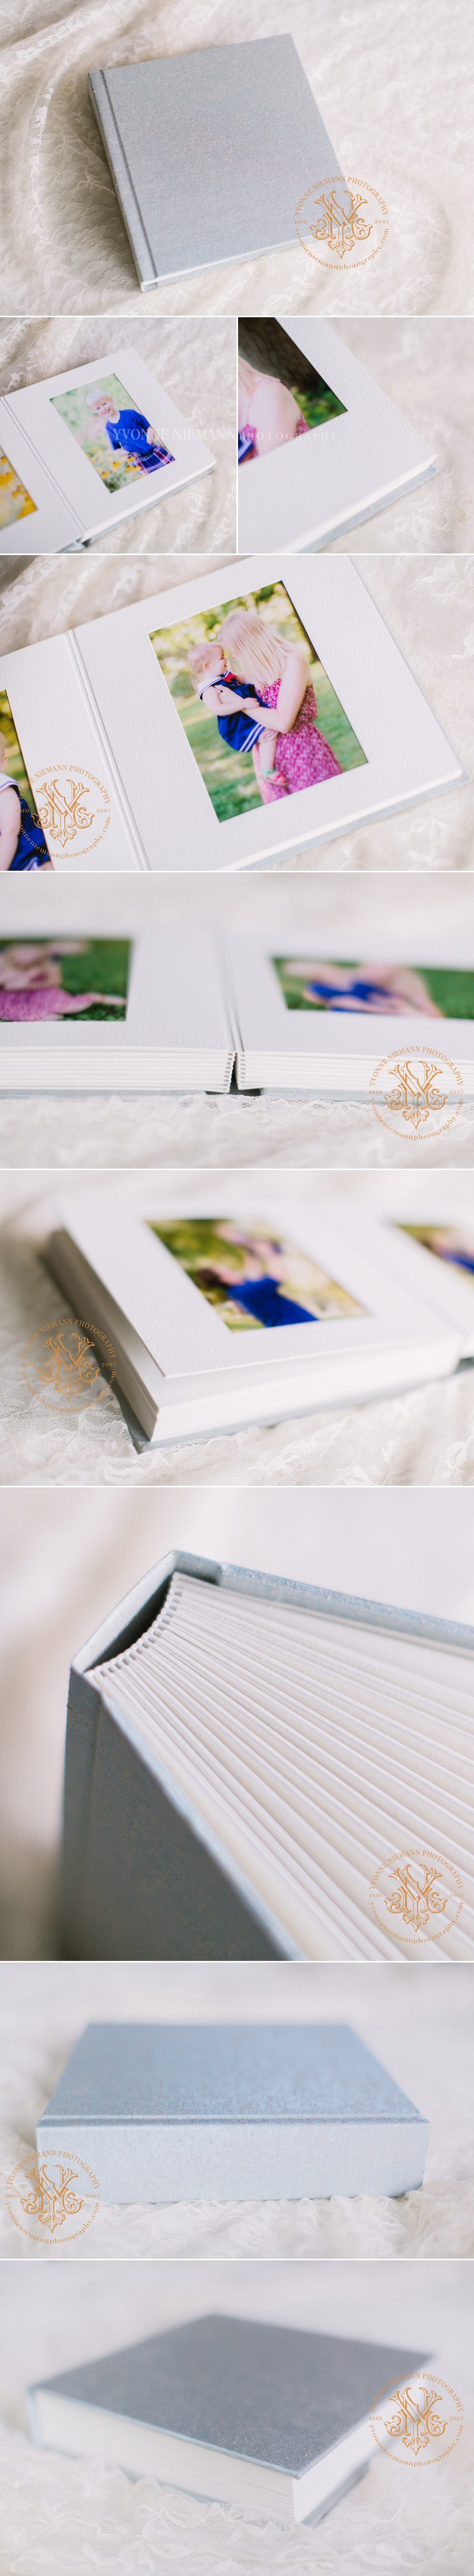 Luxe matted album for heirloom photos offered by Athens, GA family photographer, Yvonne Niemann Photography.